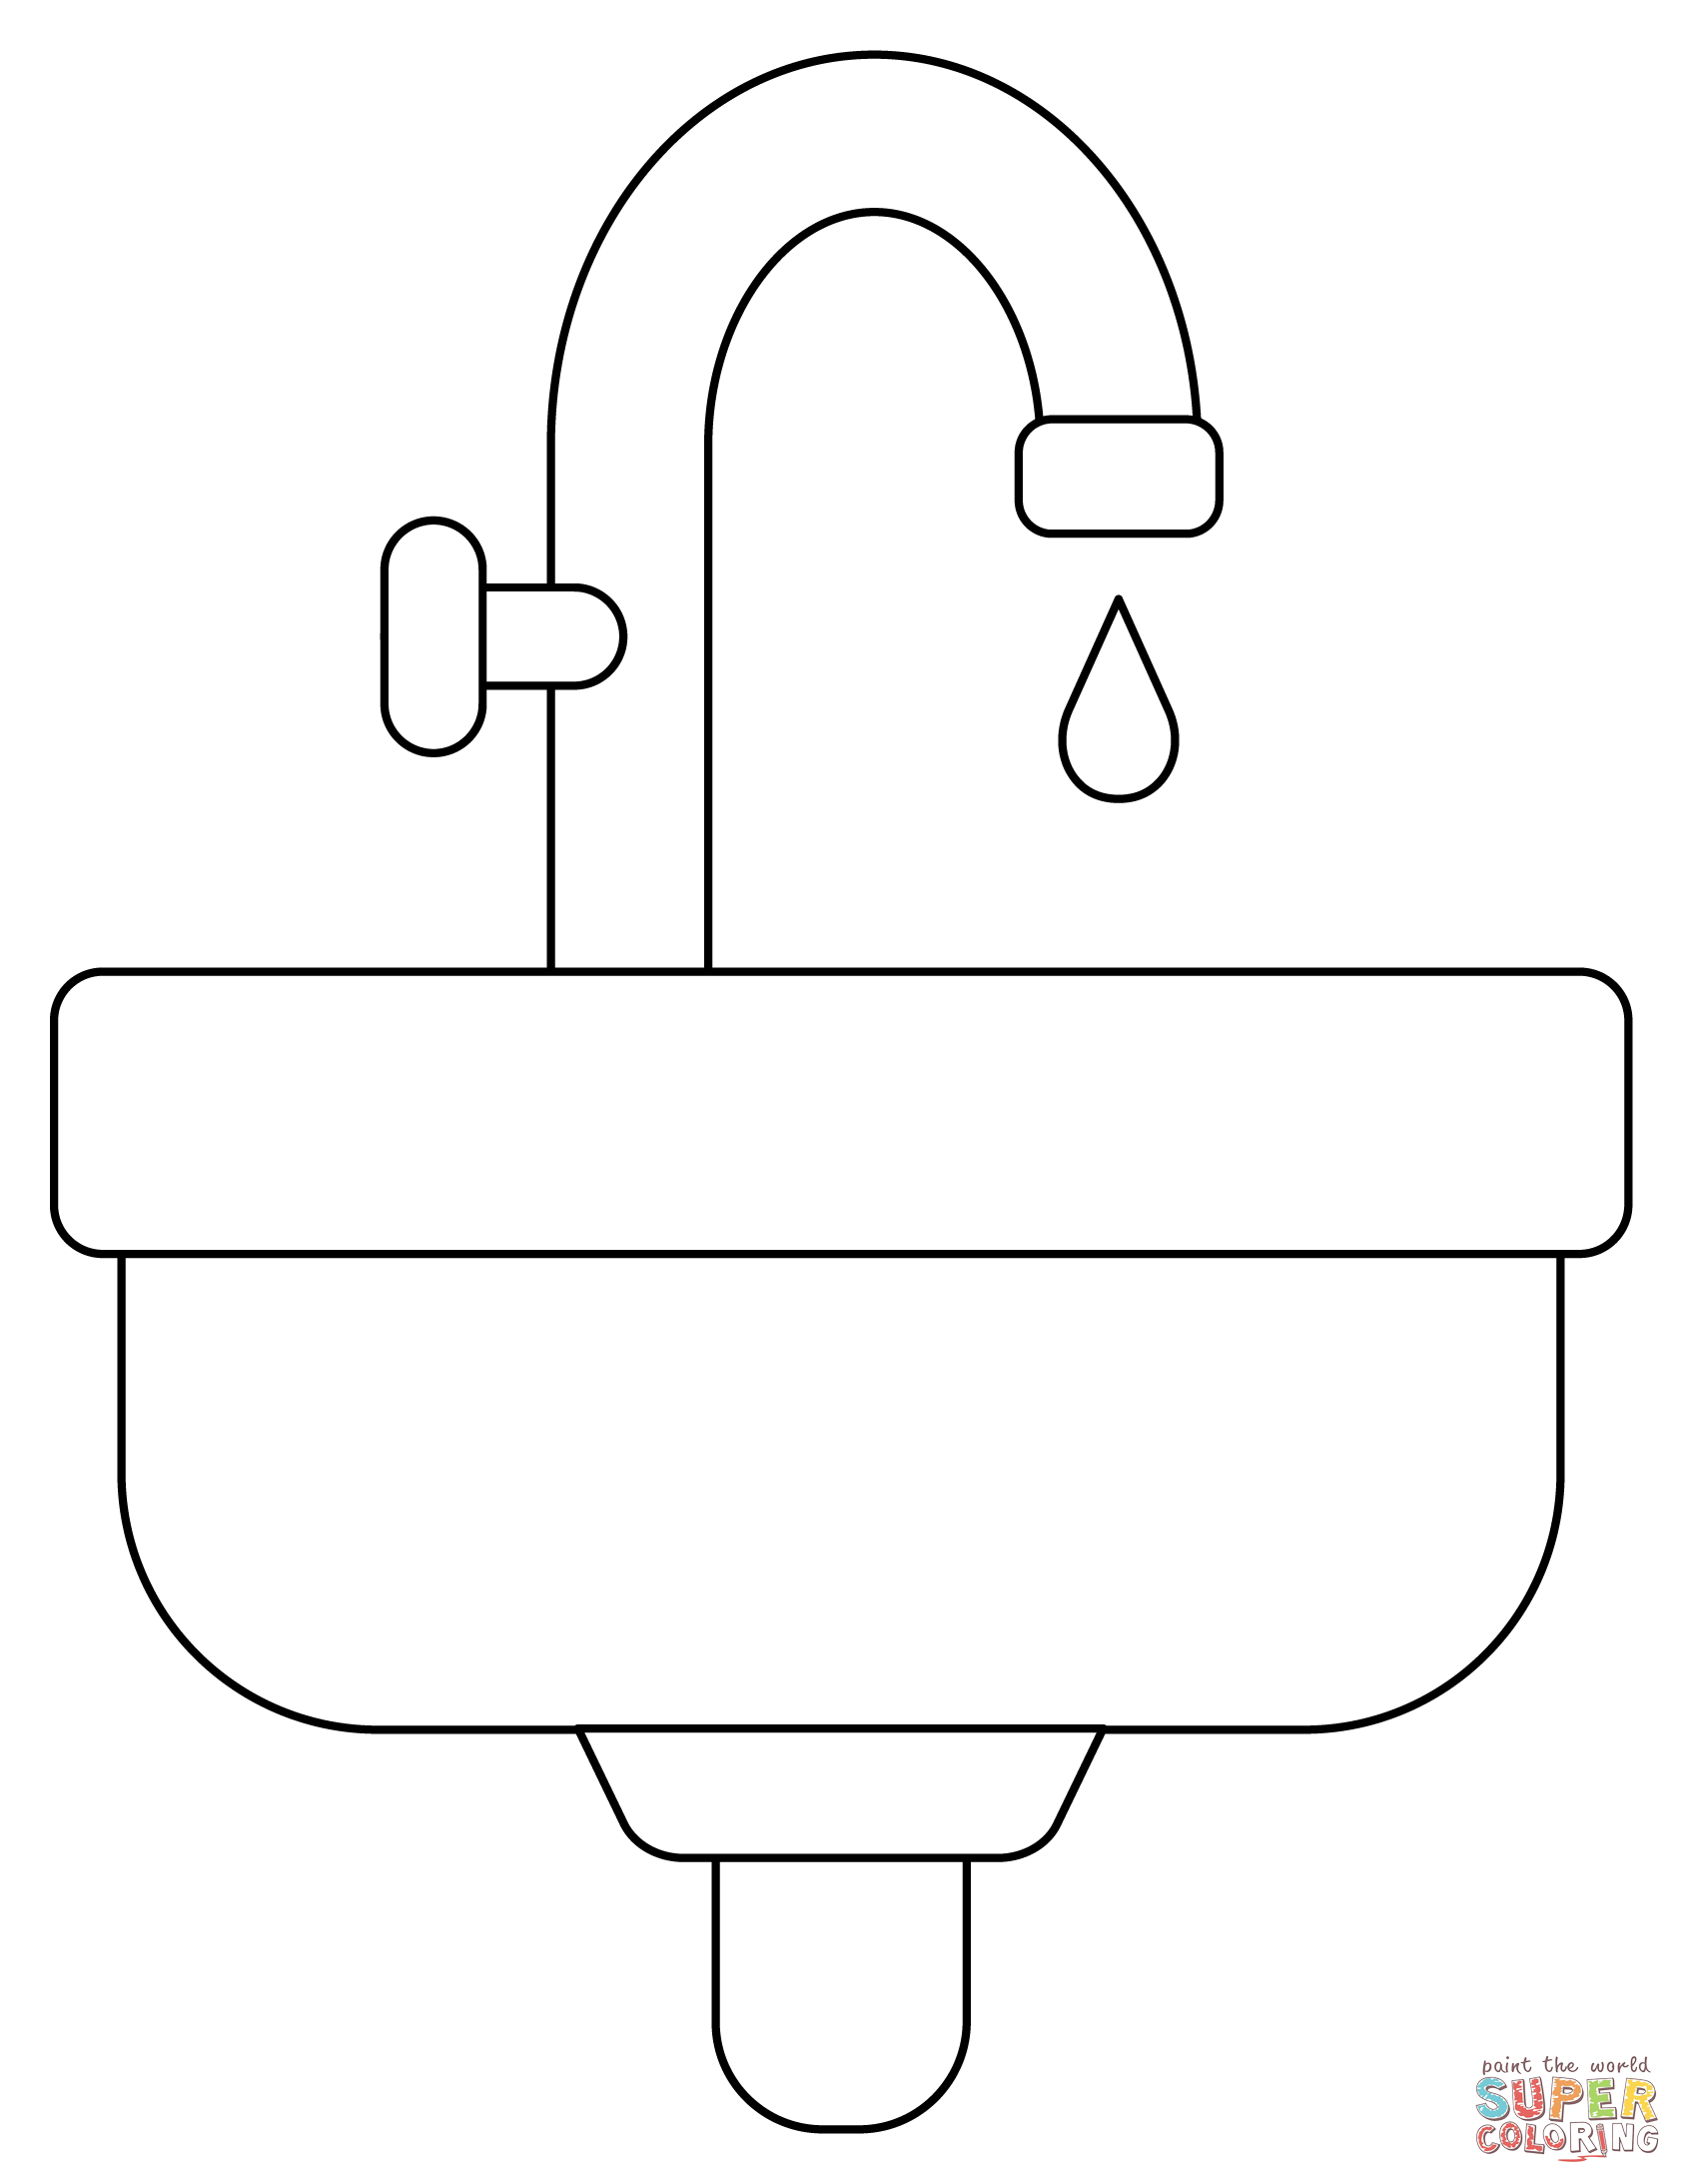 Sink coloring page free printable coloring pages